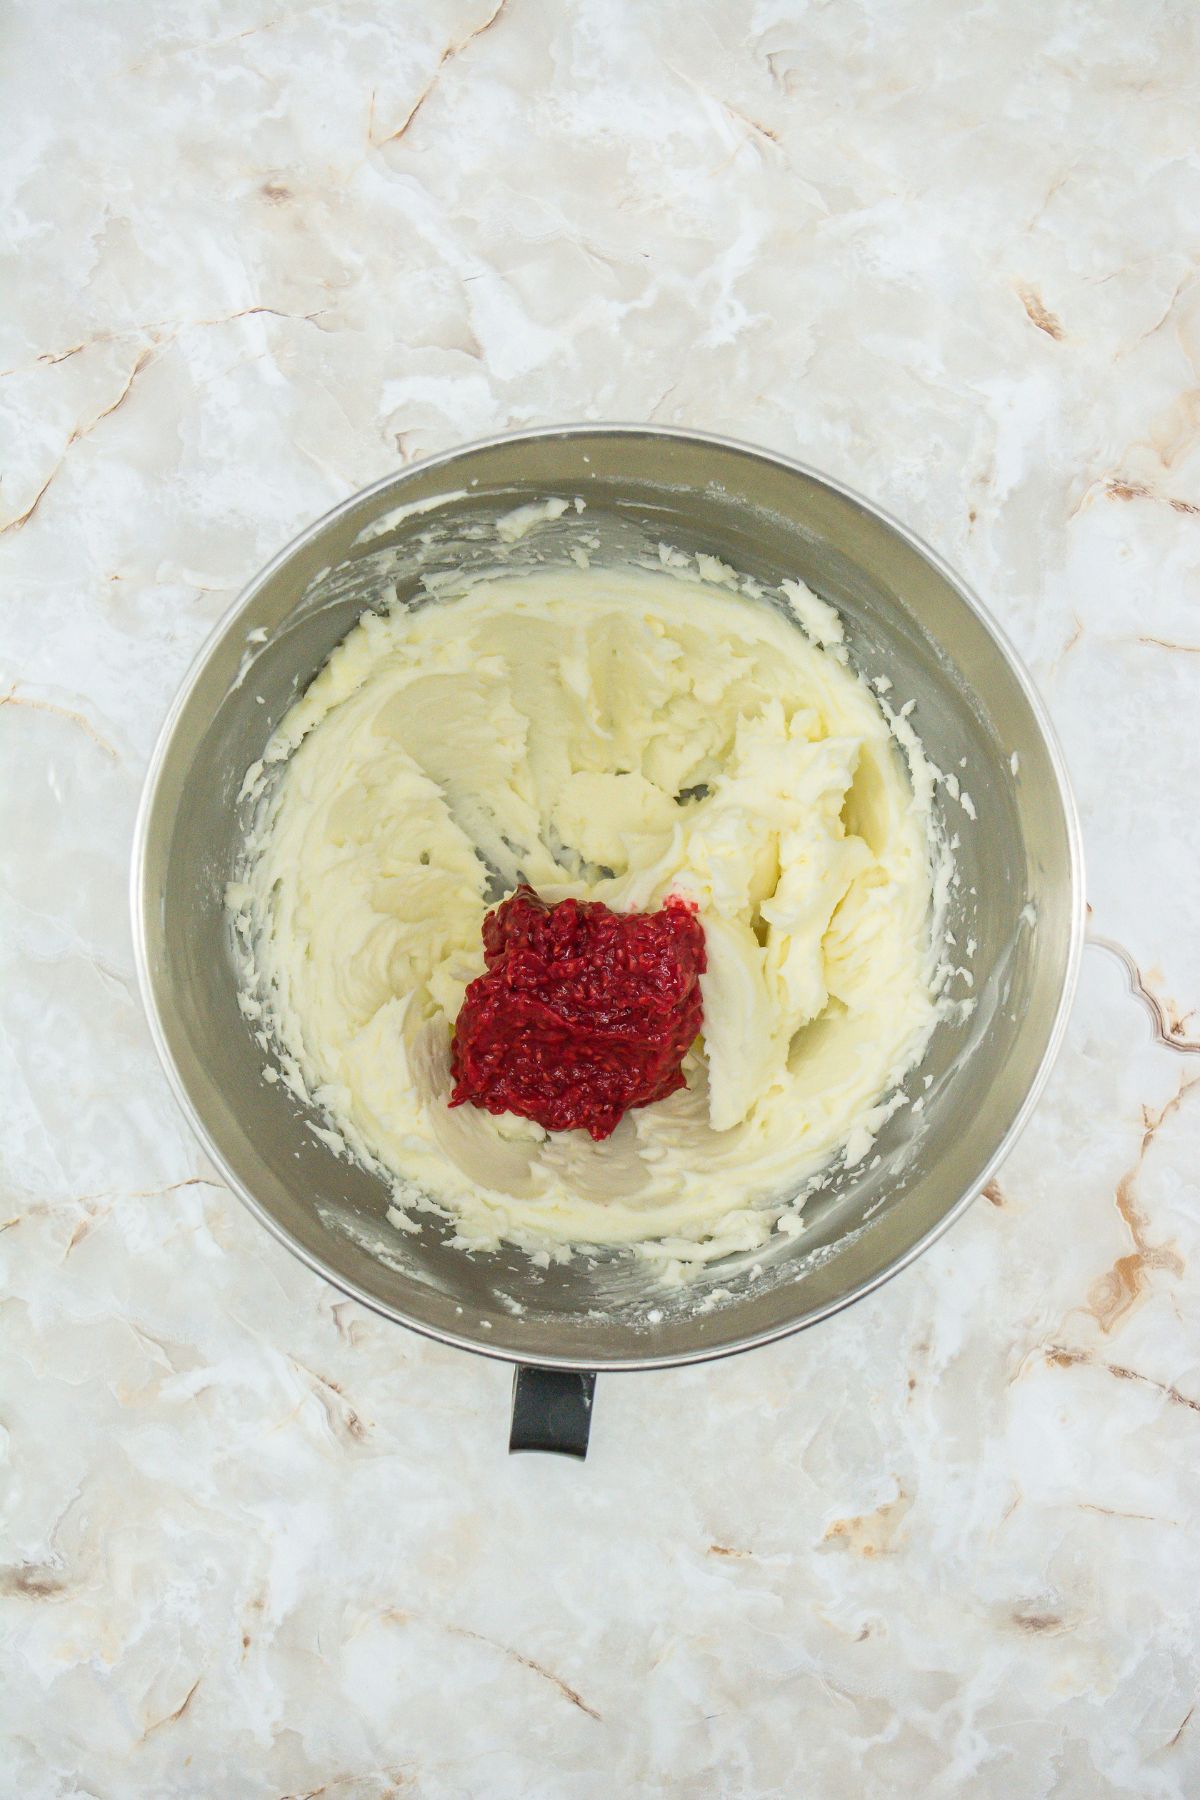 Butter and sugar with raspberry puree in a mixing bowl.